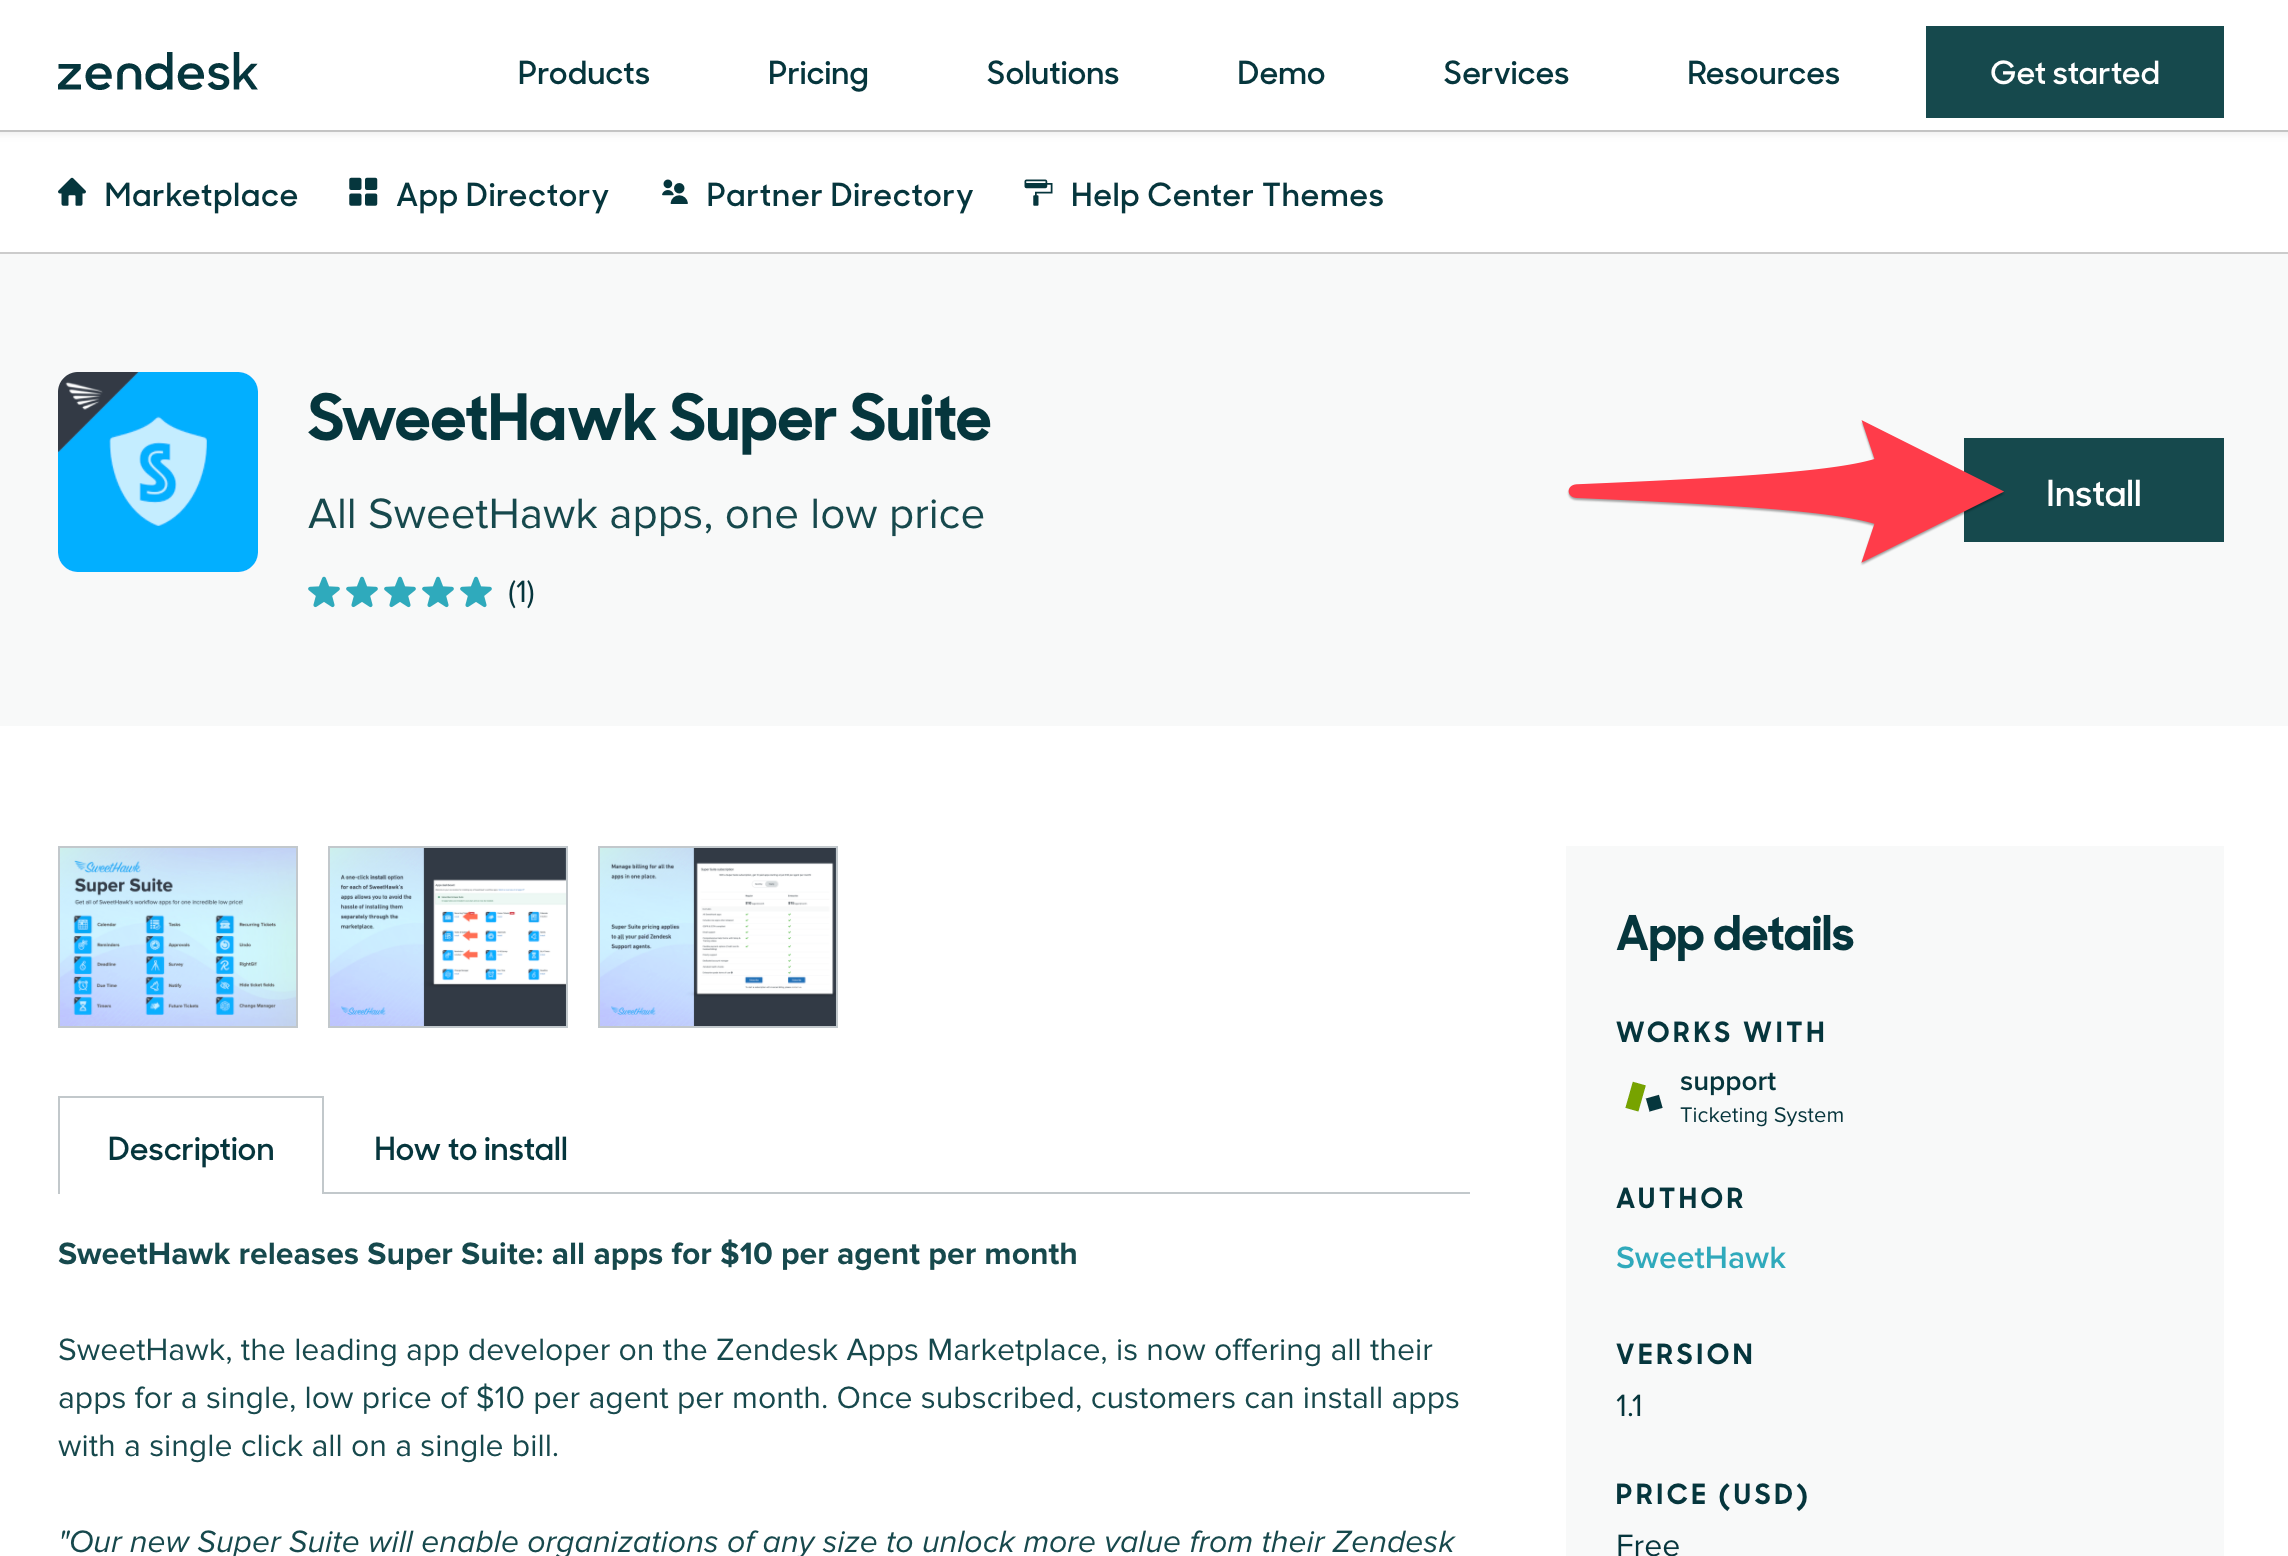 SweetHawk_Super_Suite_App_Integration_with_Zendesk_Support.png